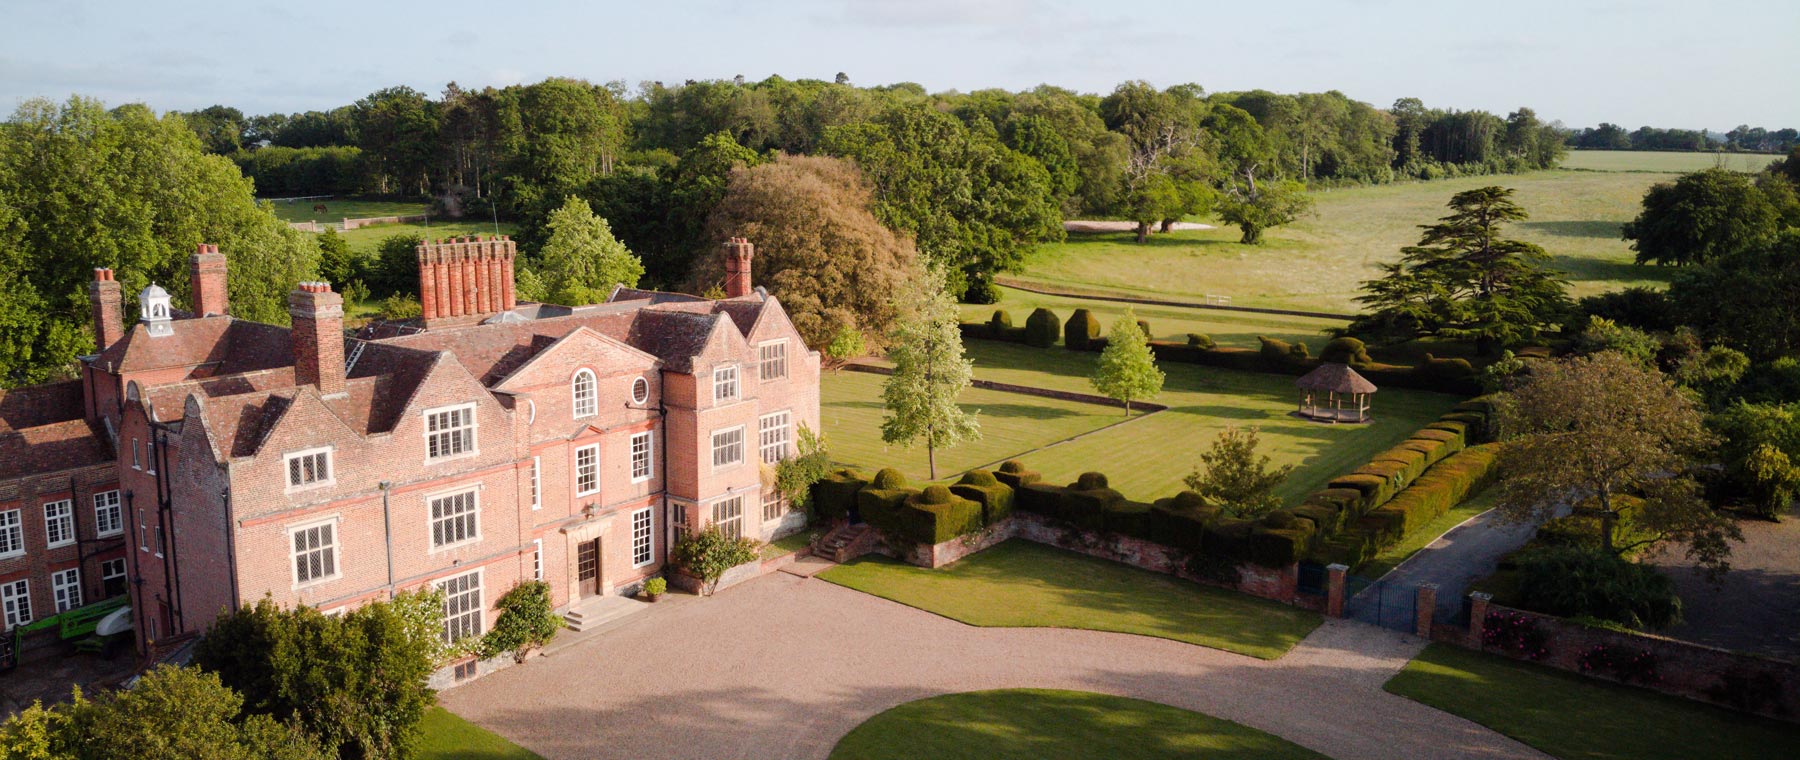 Knowlton Court | An Historic Country House, Estate and Holiday Properties